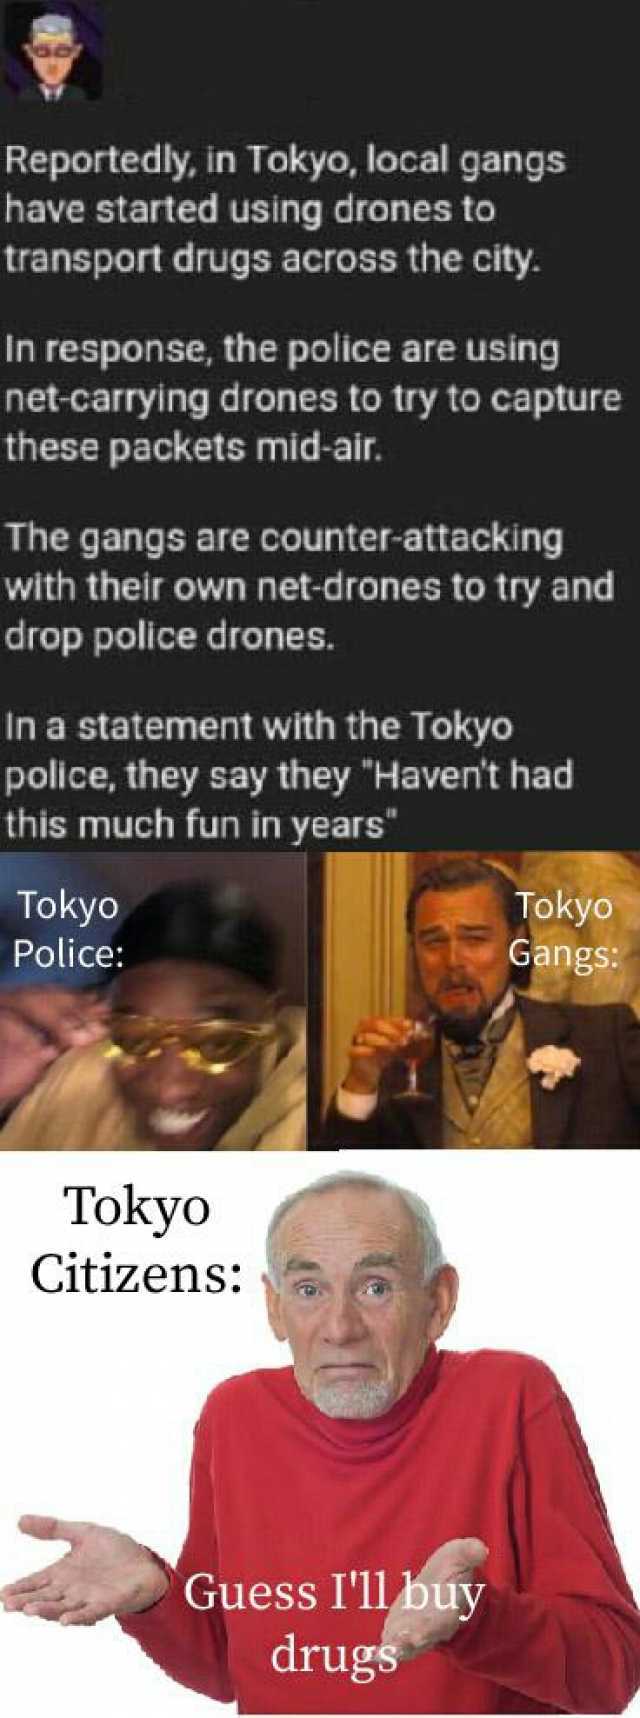 Reportedly in Tokyo local gangs have started using drones to transport drugs across the city. In response the police are using net-carrying drones to try to capture these packets mid-air. The gangs are counter-attacking with their